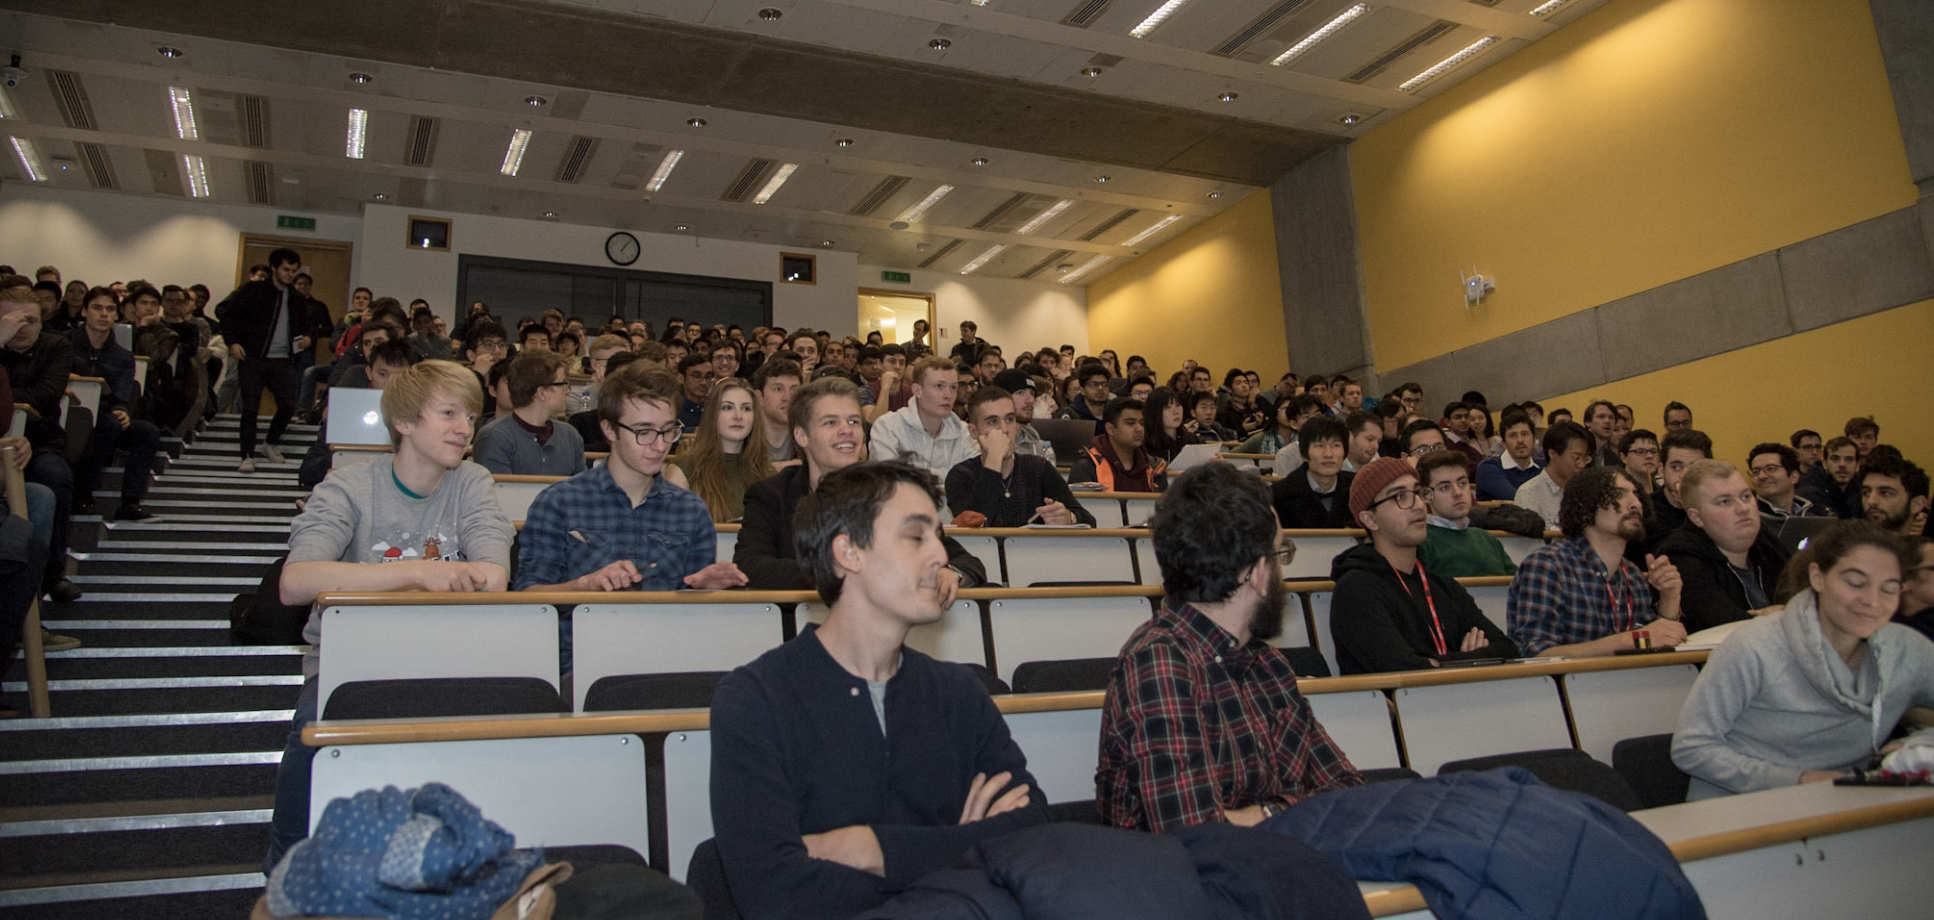 Around 300 Undergraduate and Postgraduate students from diverse backgrounds attended the launch event